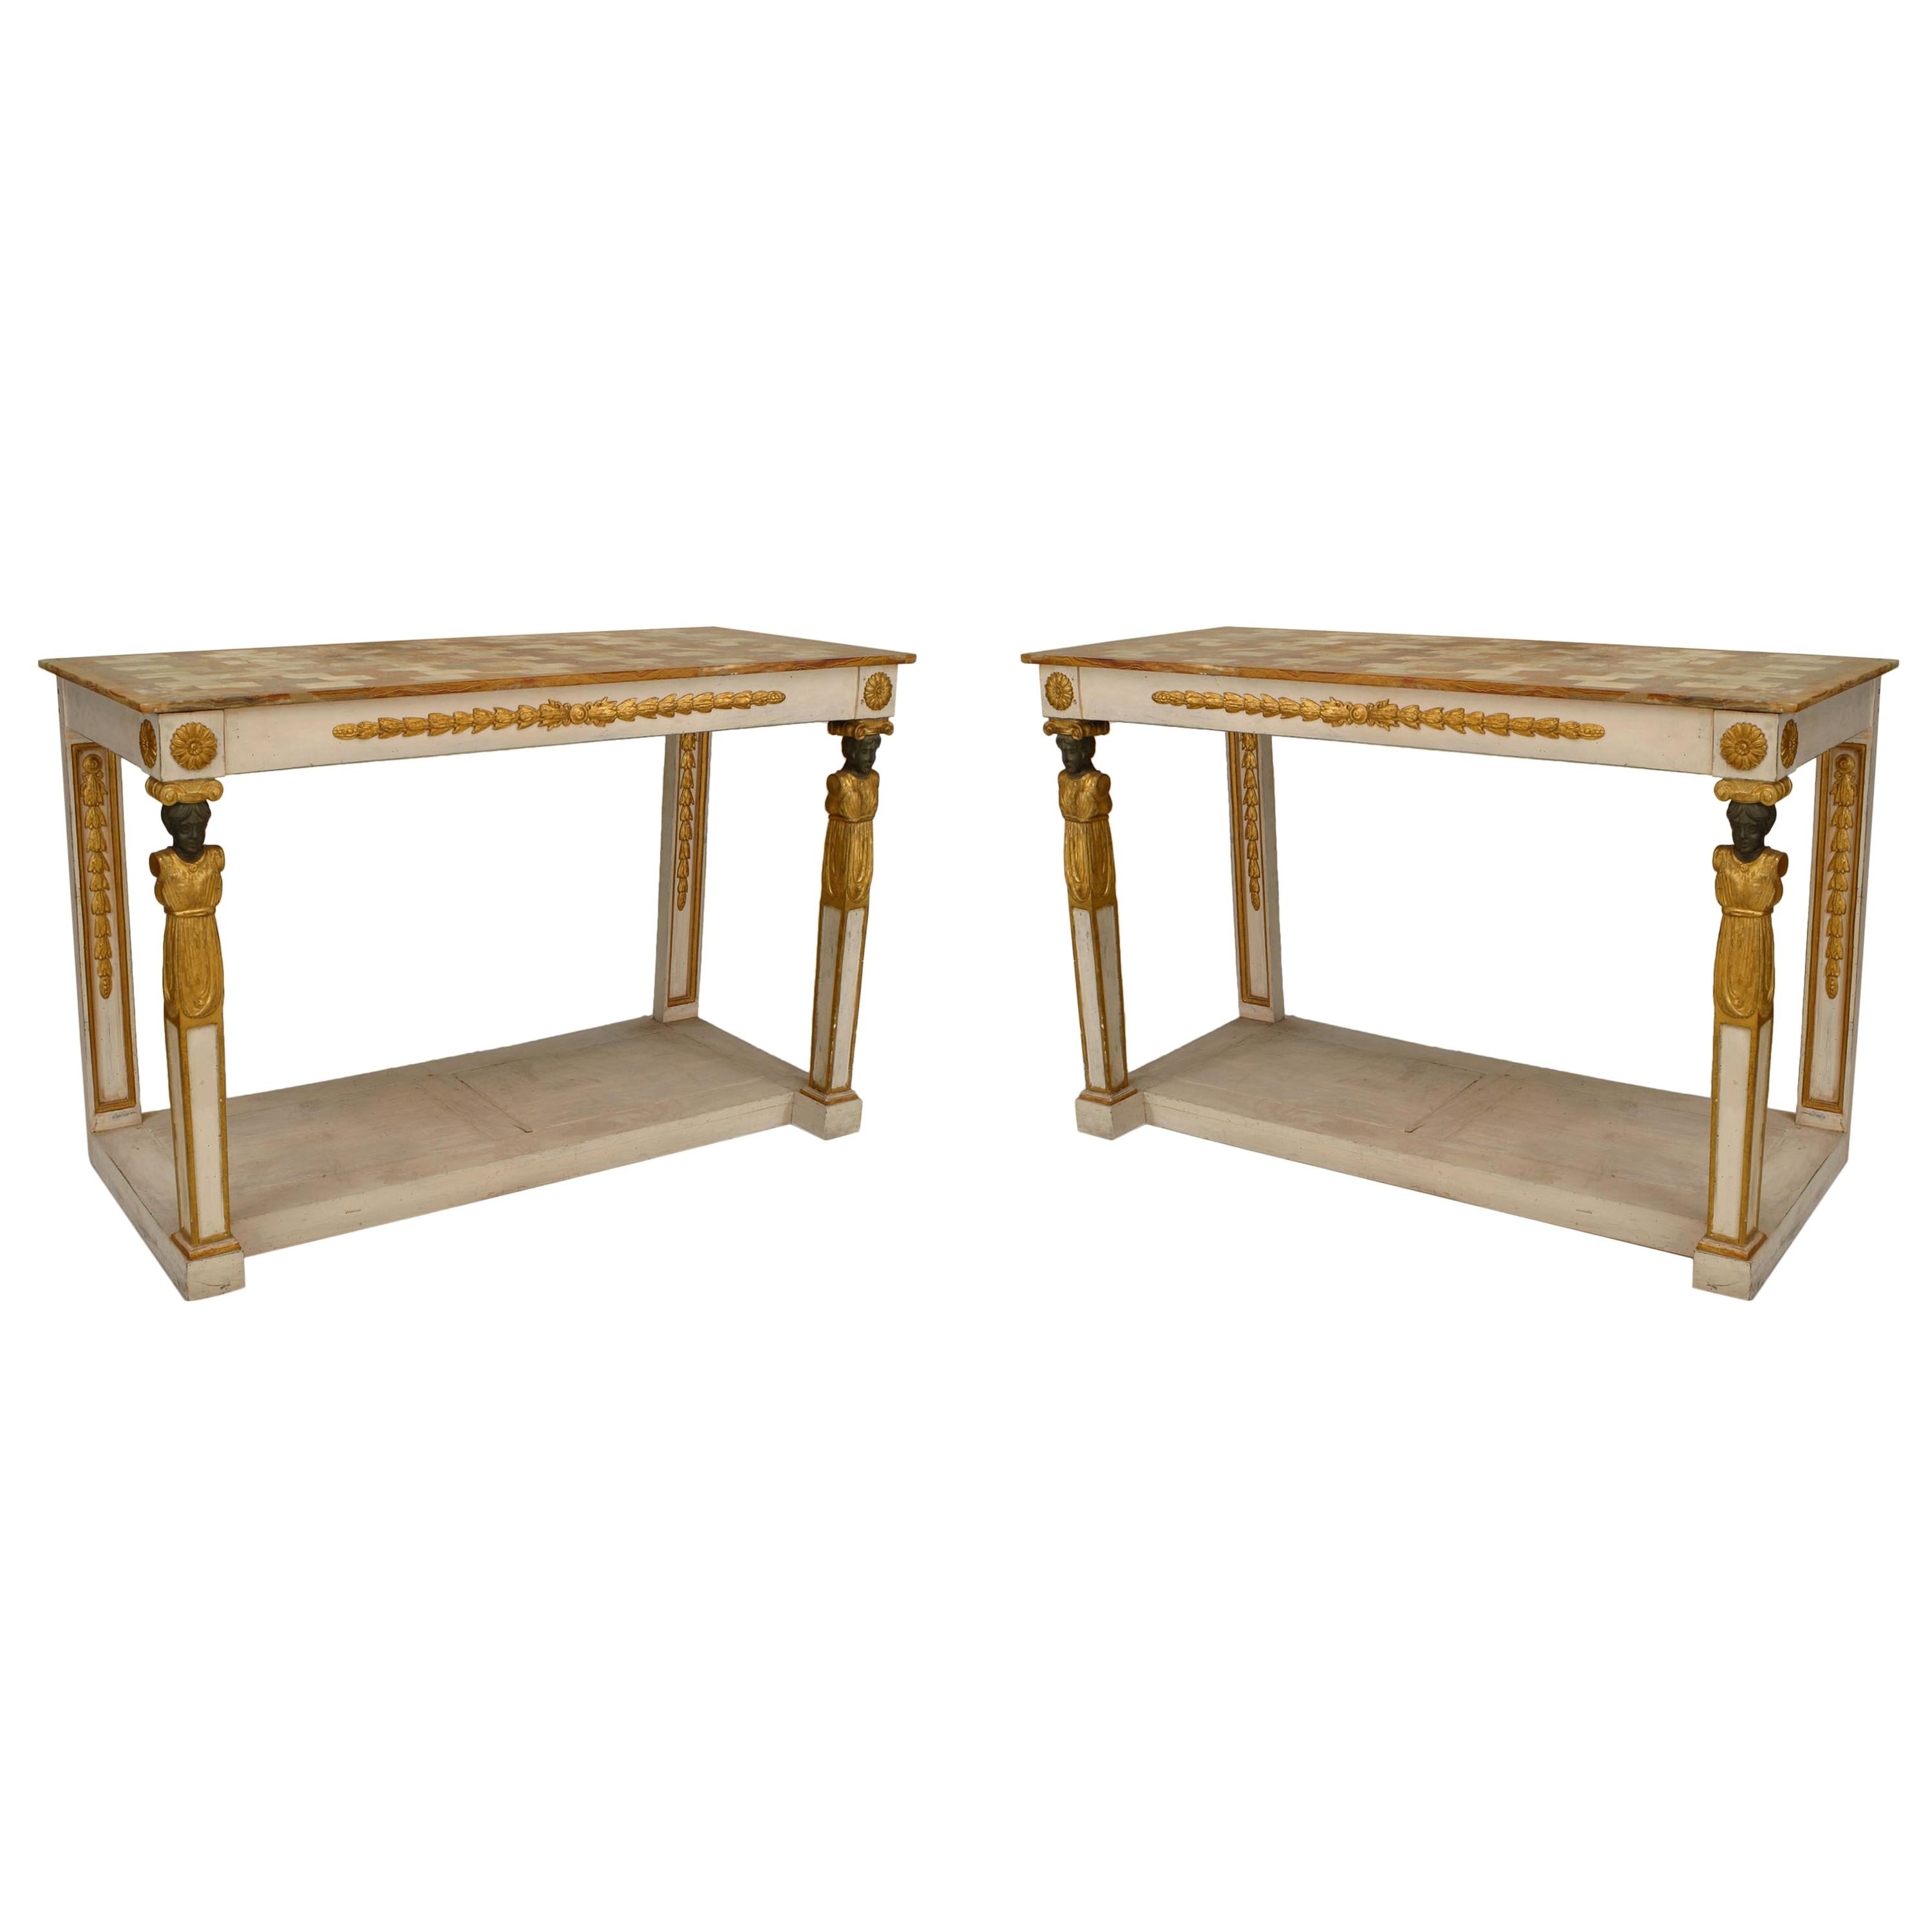 Pair of Italian Neo-Classic Painted Onyx Top Console Tables